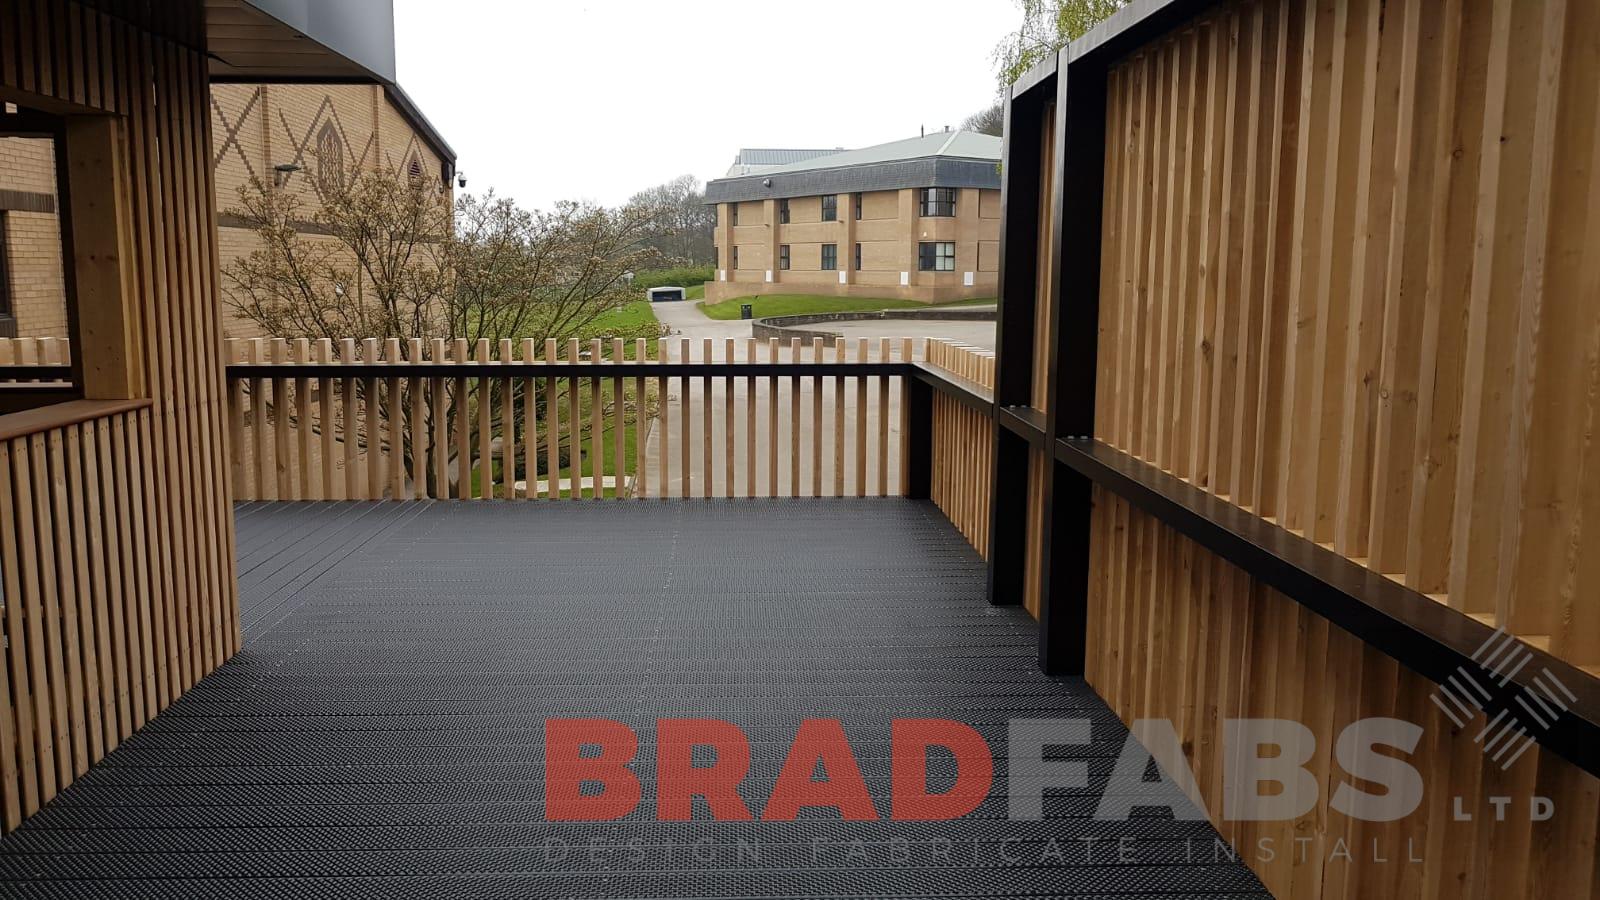 Bradfabs Ltd bespoke staircase and landing, the flooring is BNOP5 and staircase is manufactured from mild steel 